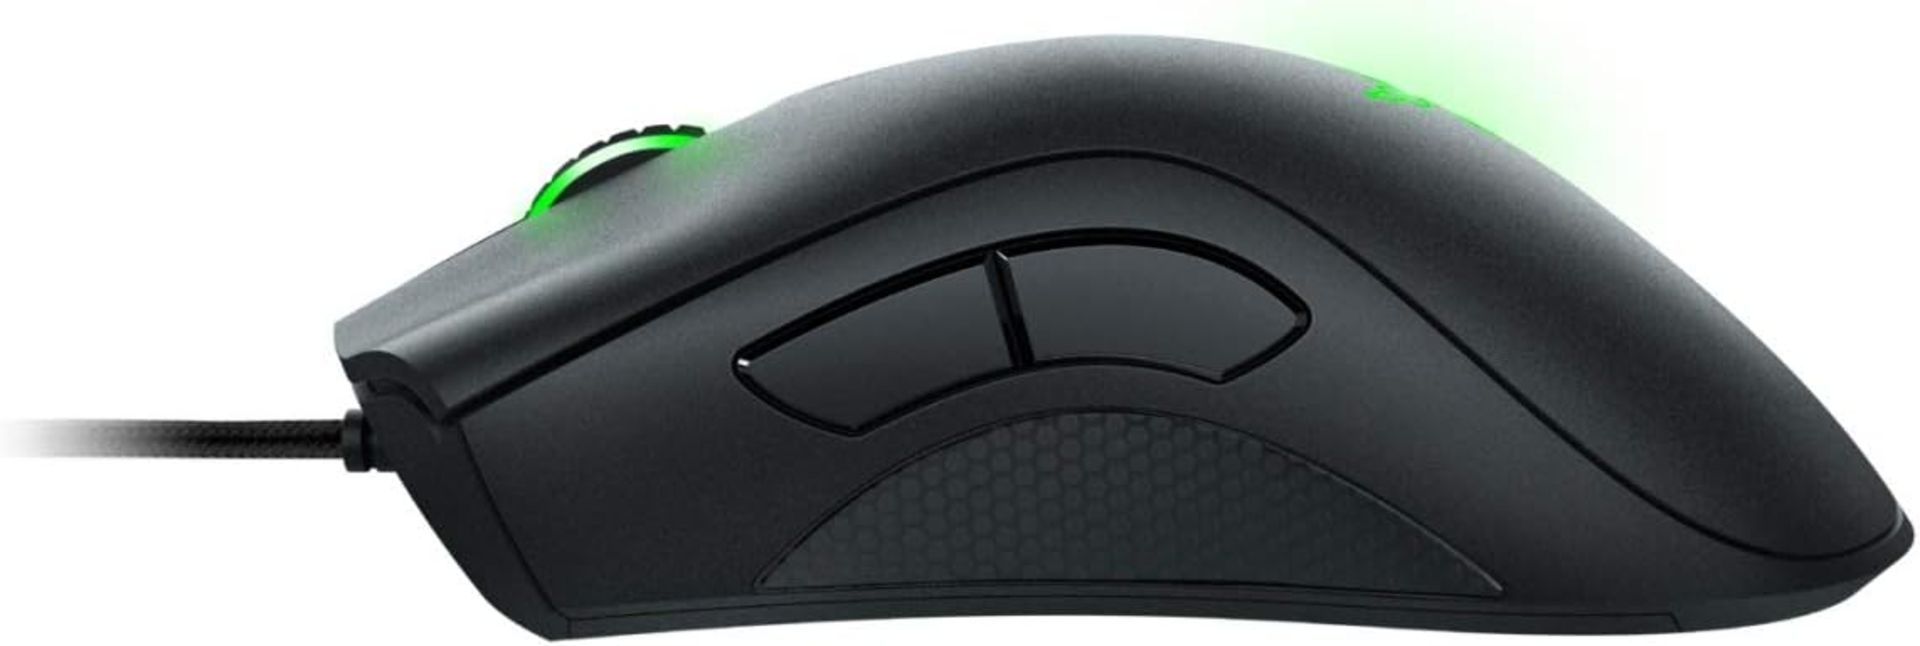 5x BRAND NEW FACTORY SEALED RAZER Deathadder Essential Gaming Mouse. RRP £22.99 EACH. The Razer - Image 5 of 5